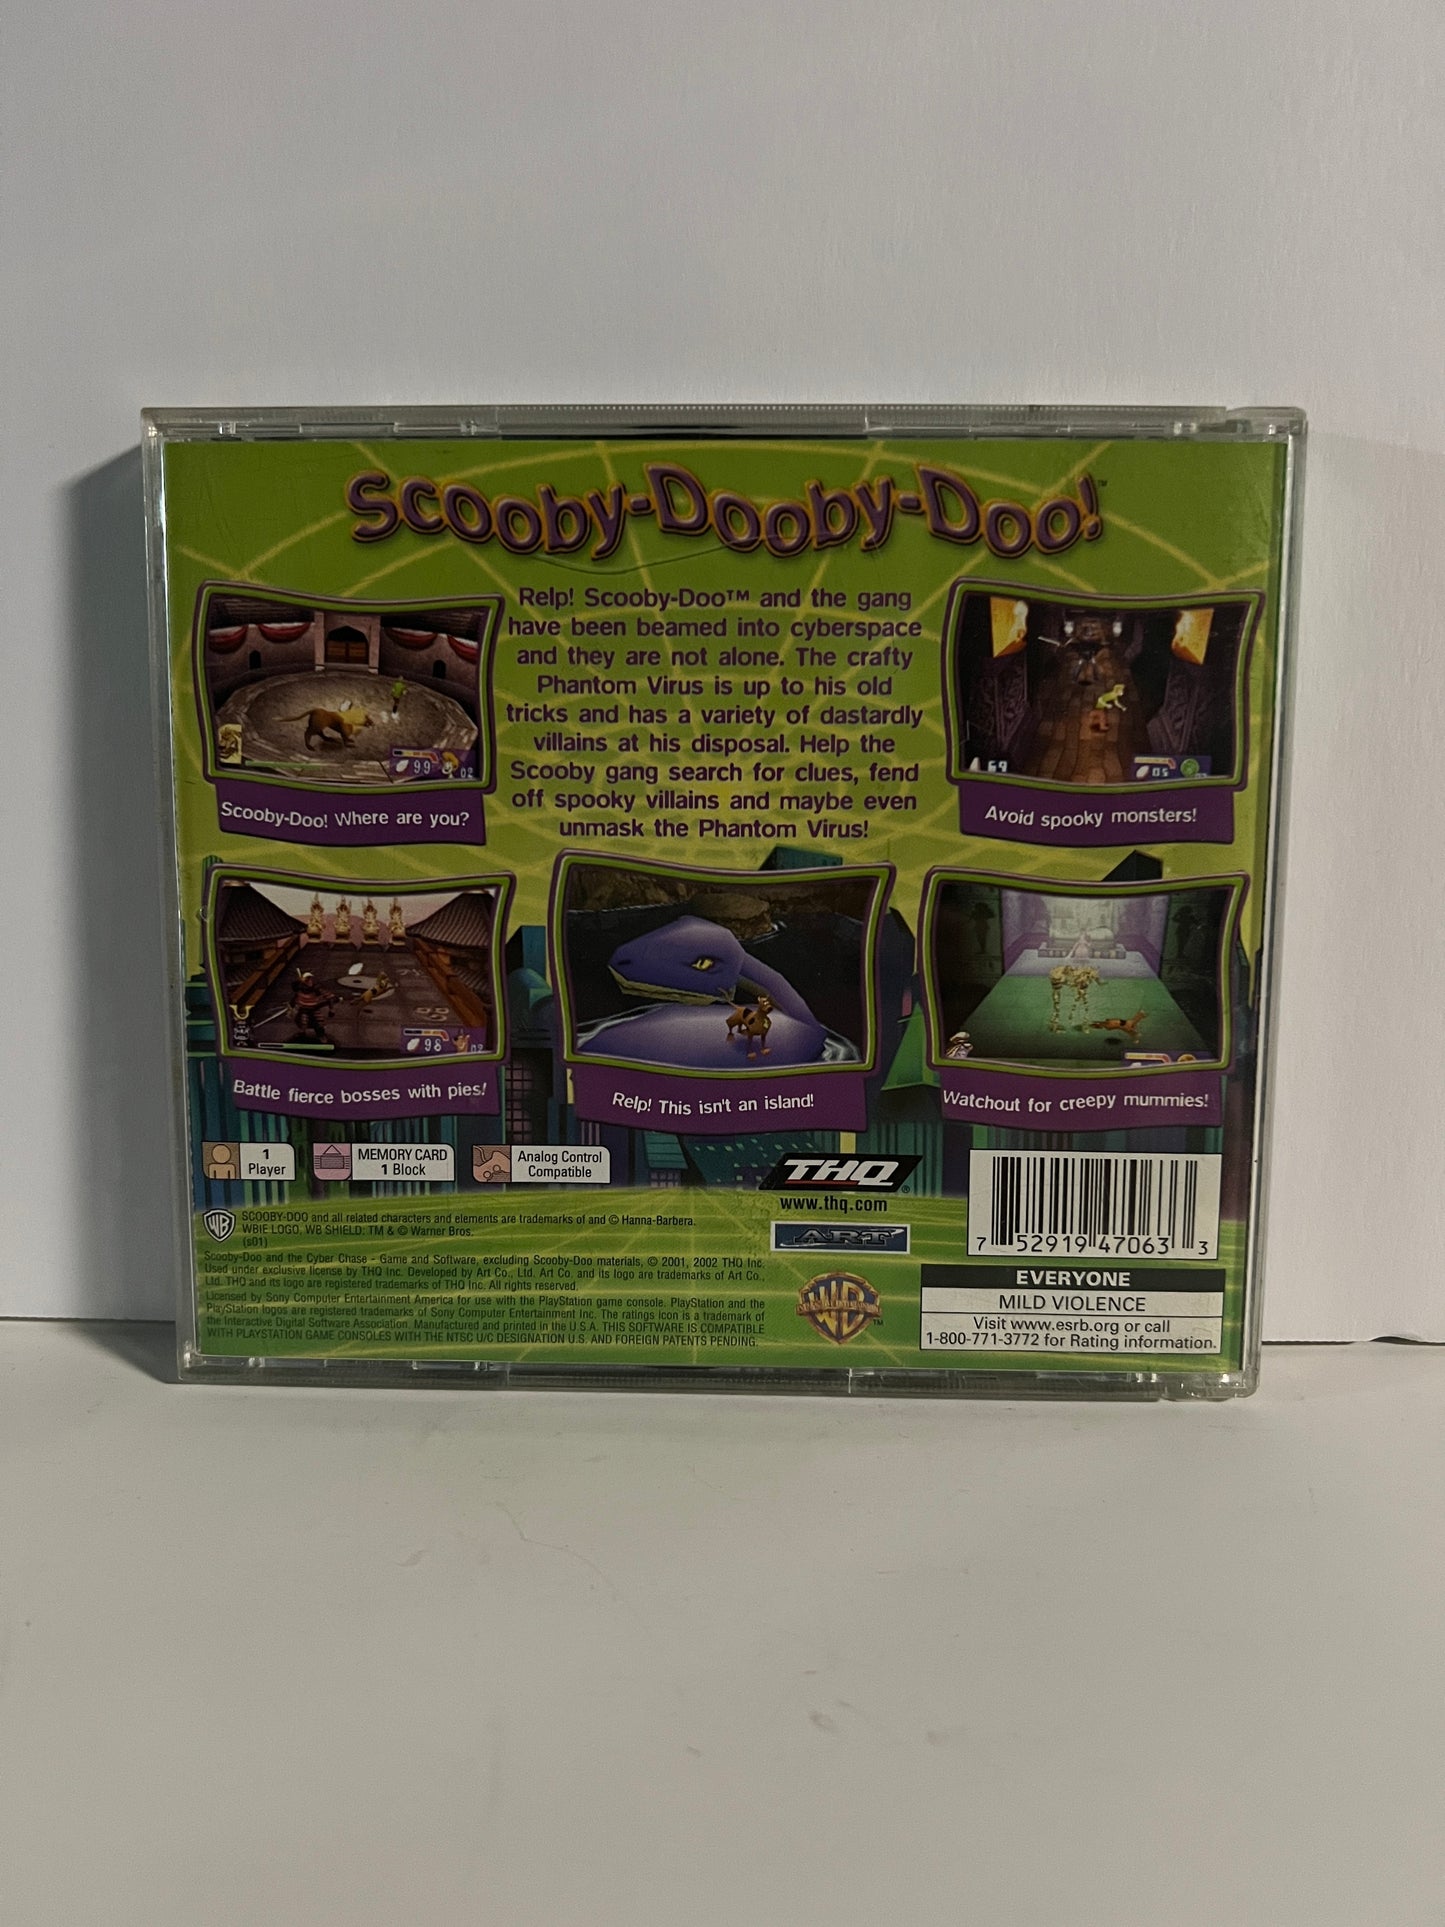 Scooby-doo and the Cyber Chase - PS1 Game - Used